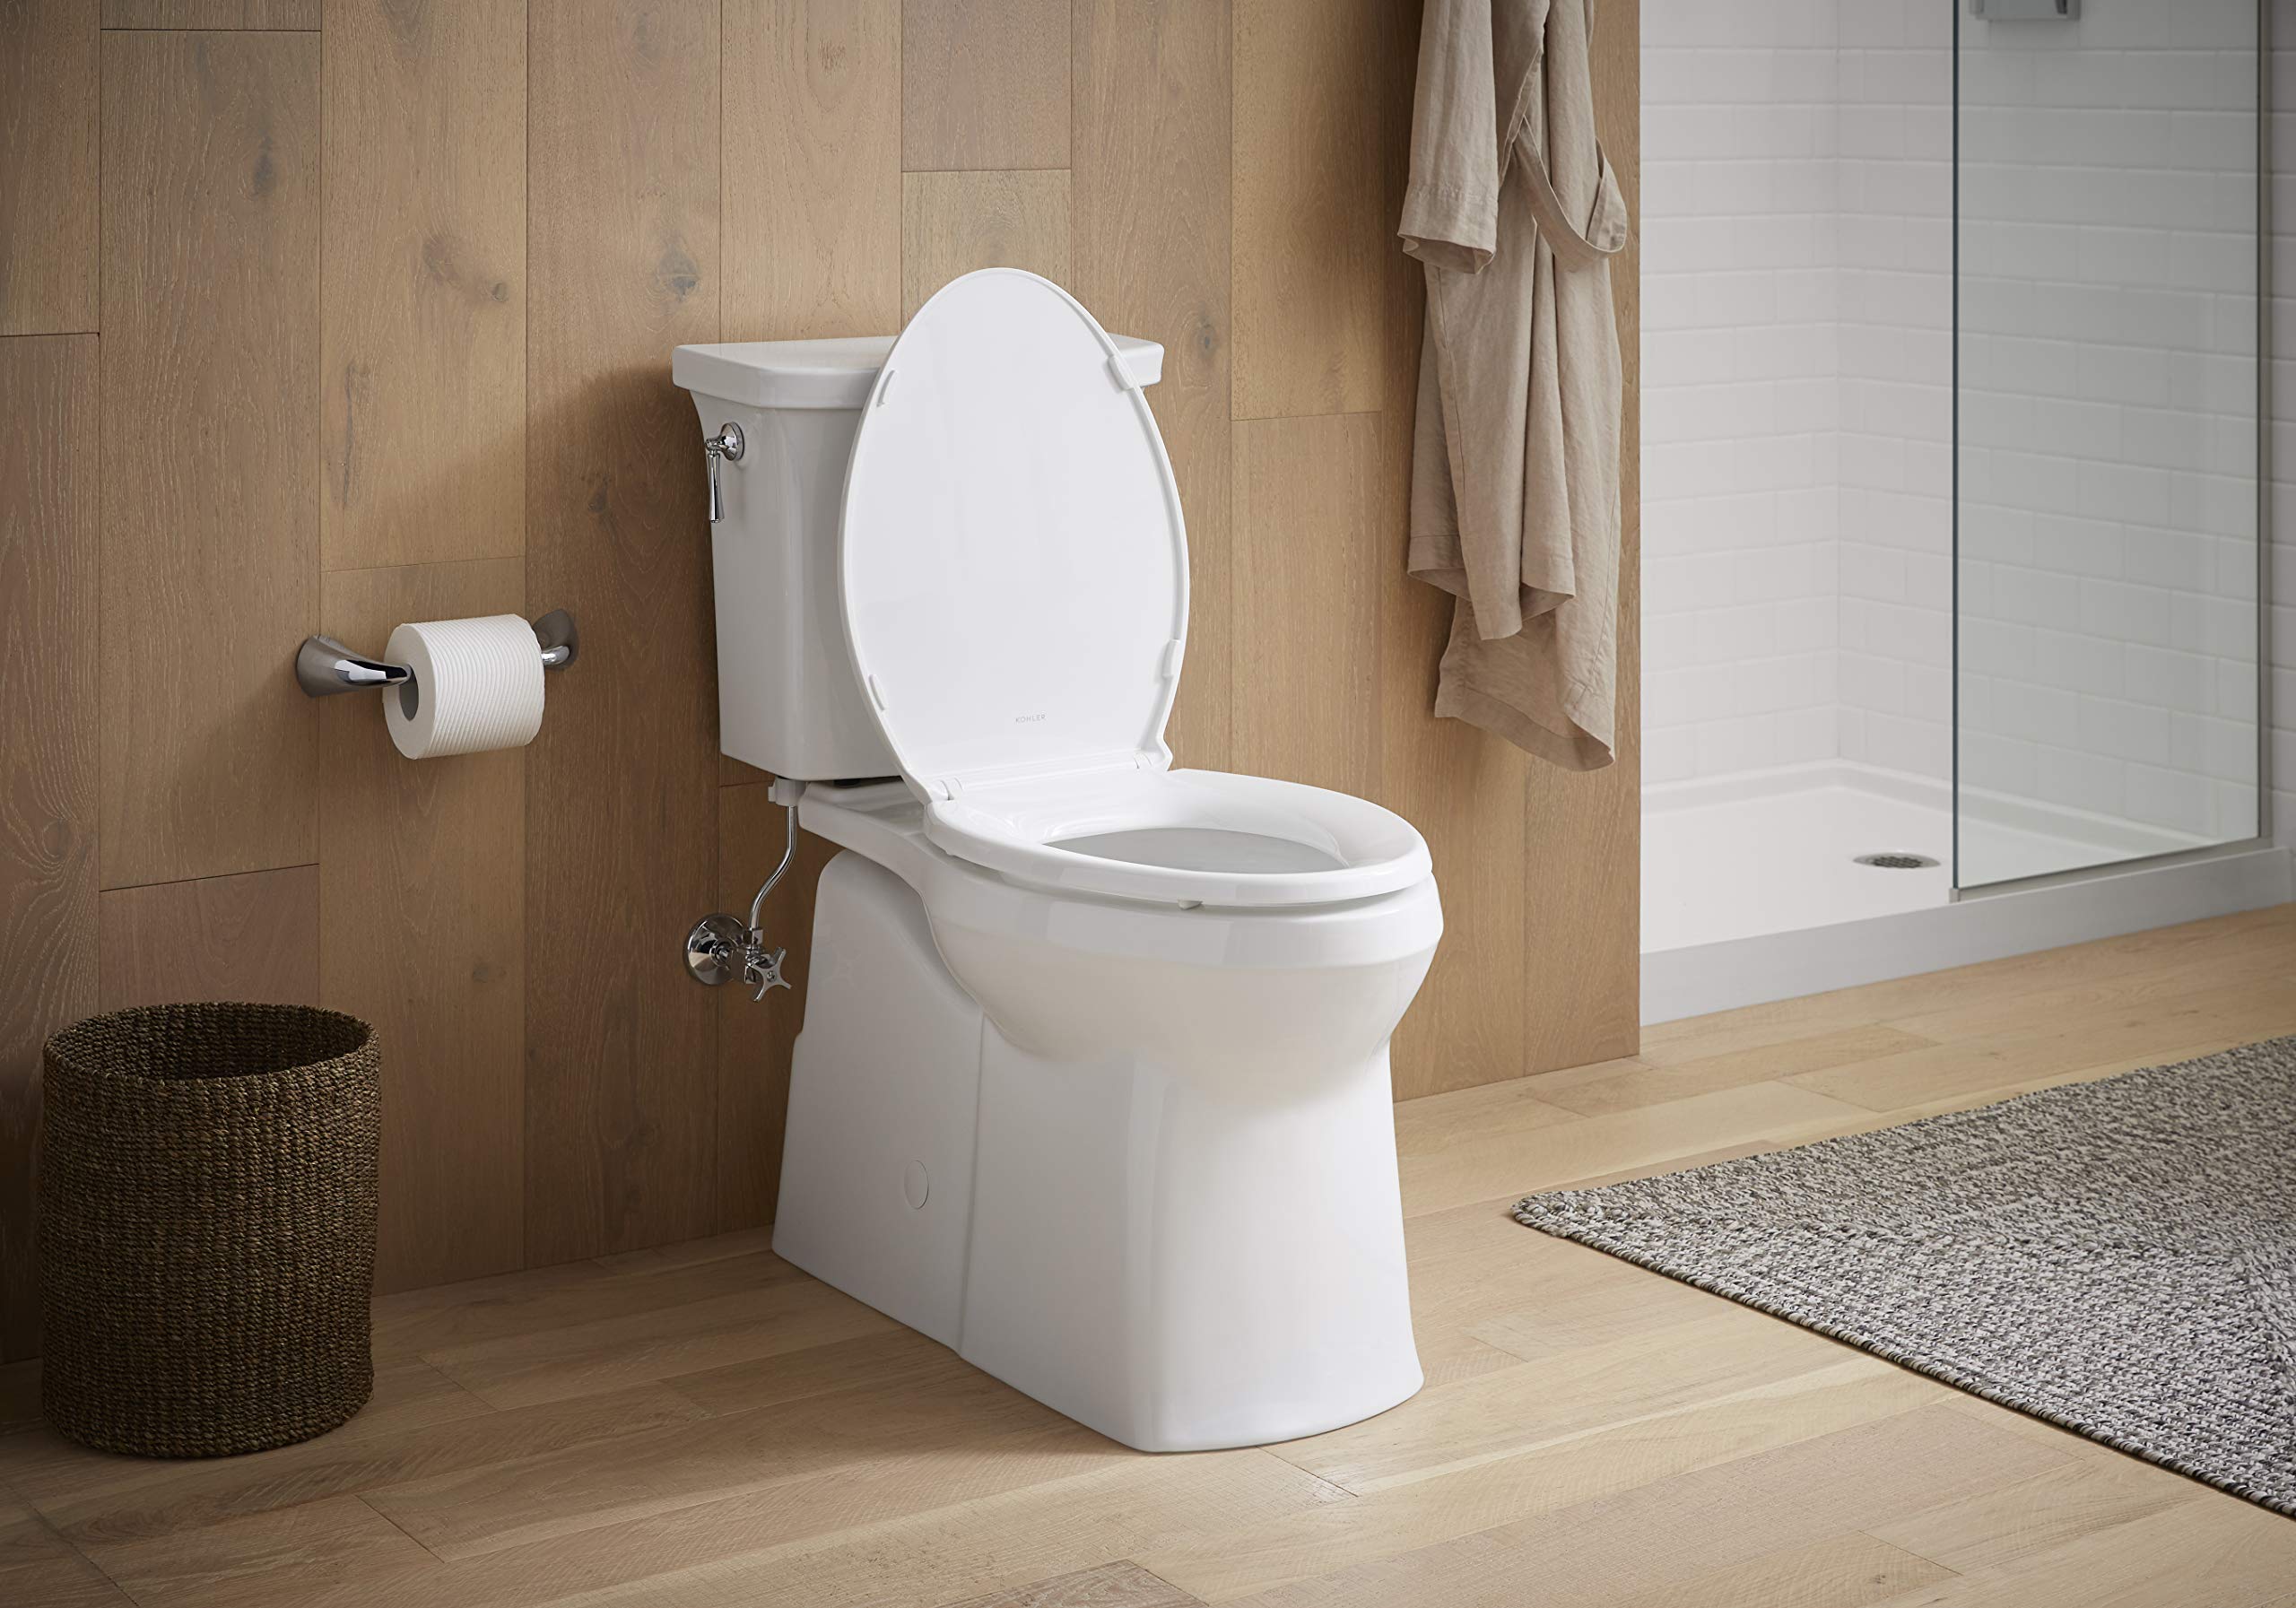 KOHLER 24495-A-0 Border ReadyLatch Elongated Toilet Seat, Quiet-Close Lid and Seat, Grip-Tight Bumpers and Installation Hardware, White